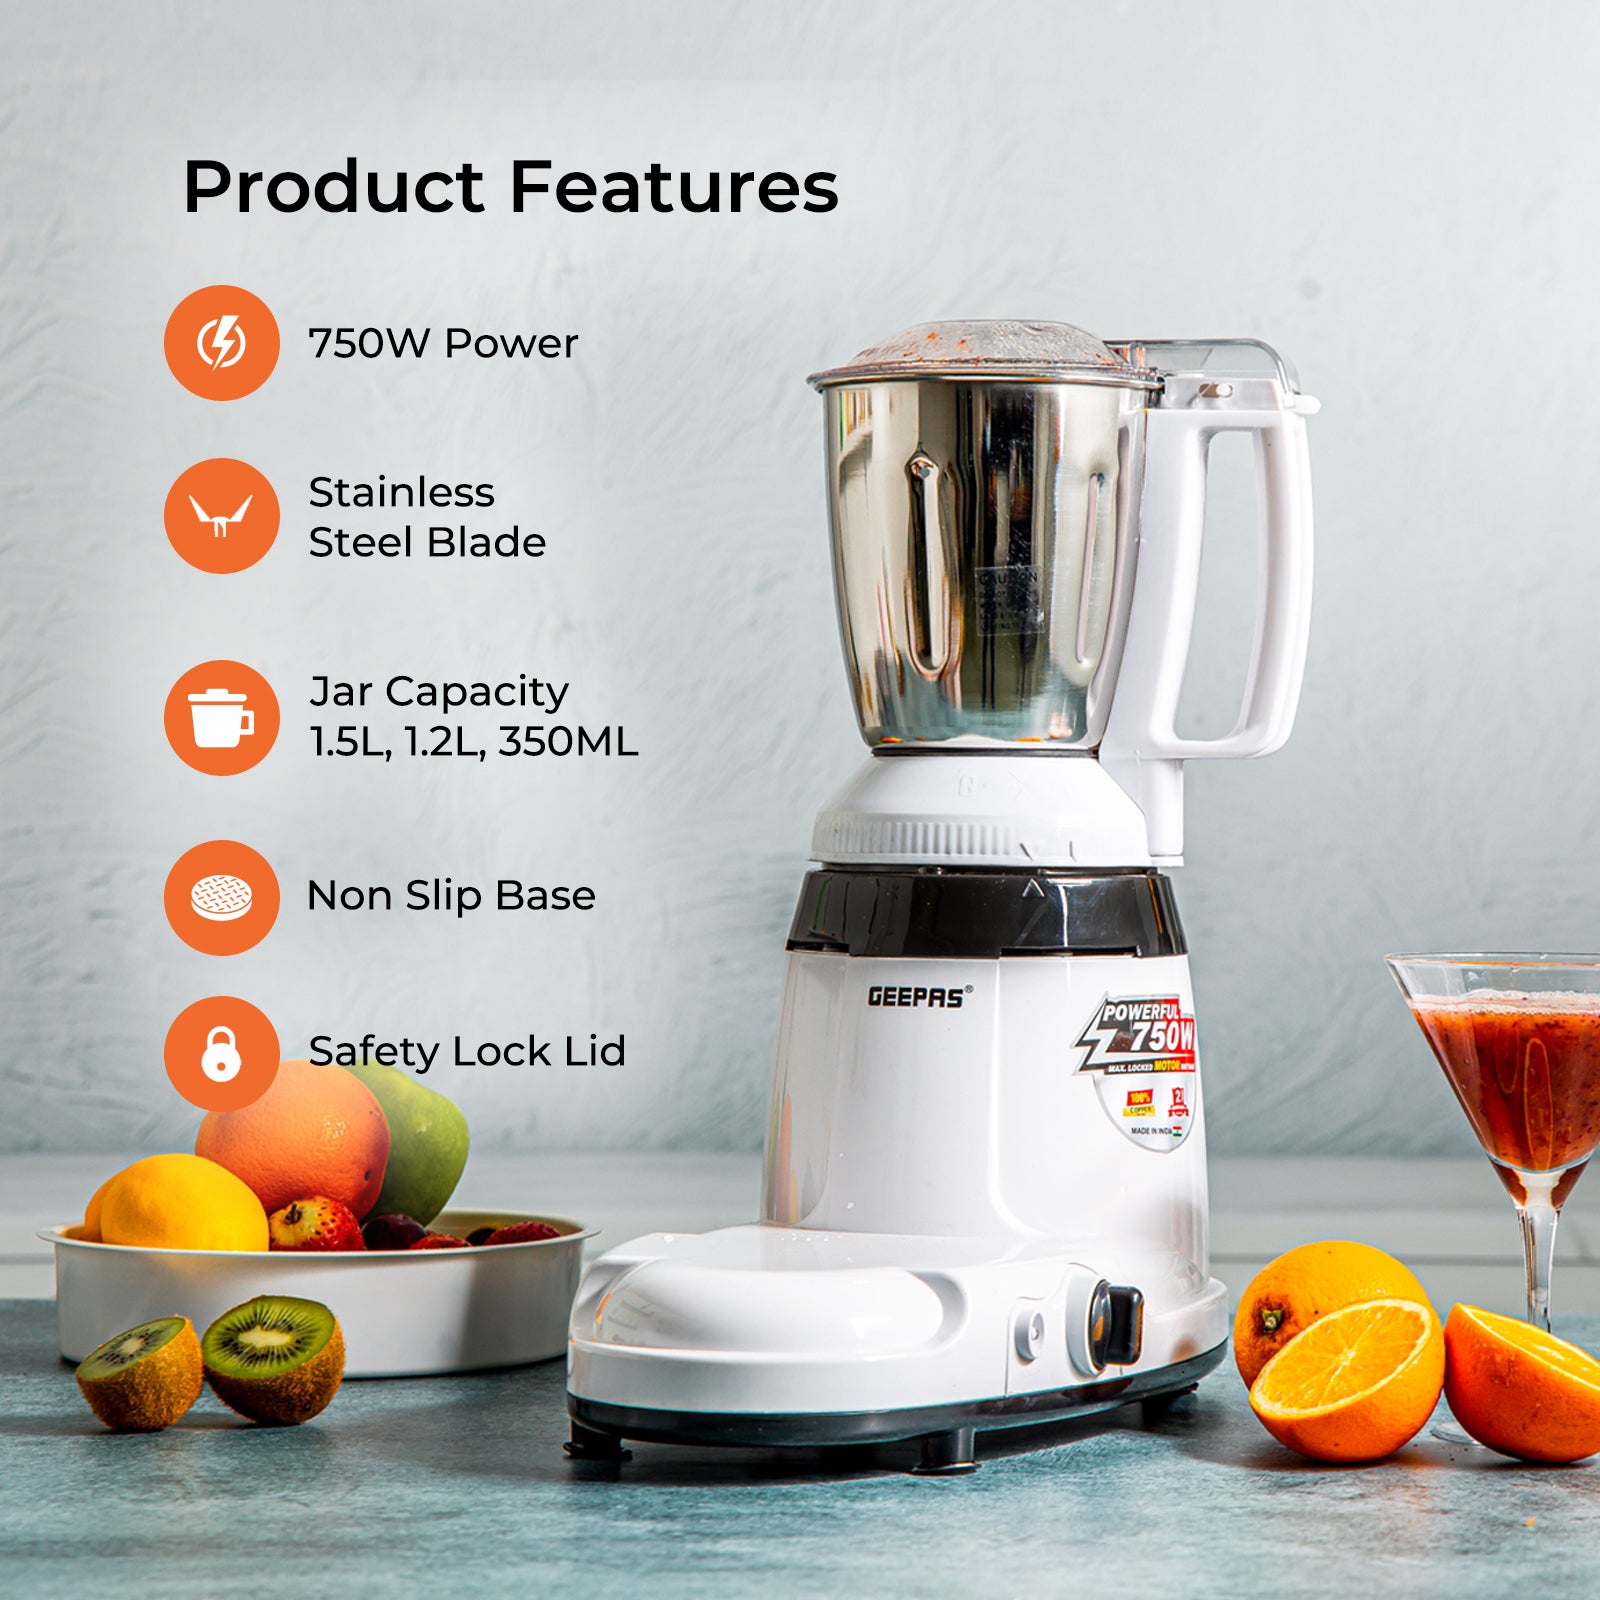 3-In-1 Wet and Dry Authentic Mixer Grinder 750W